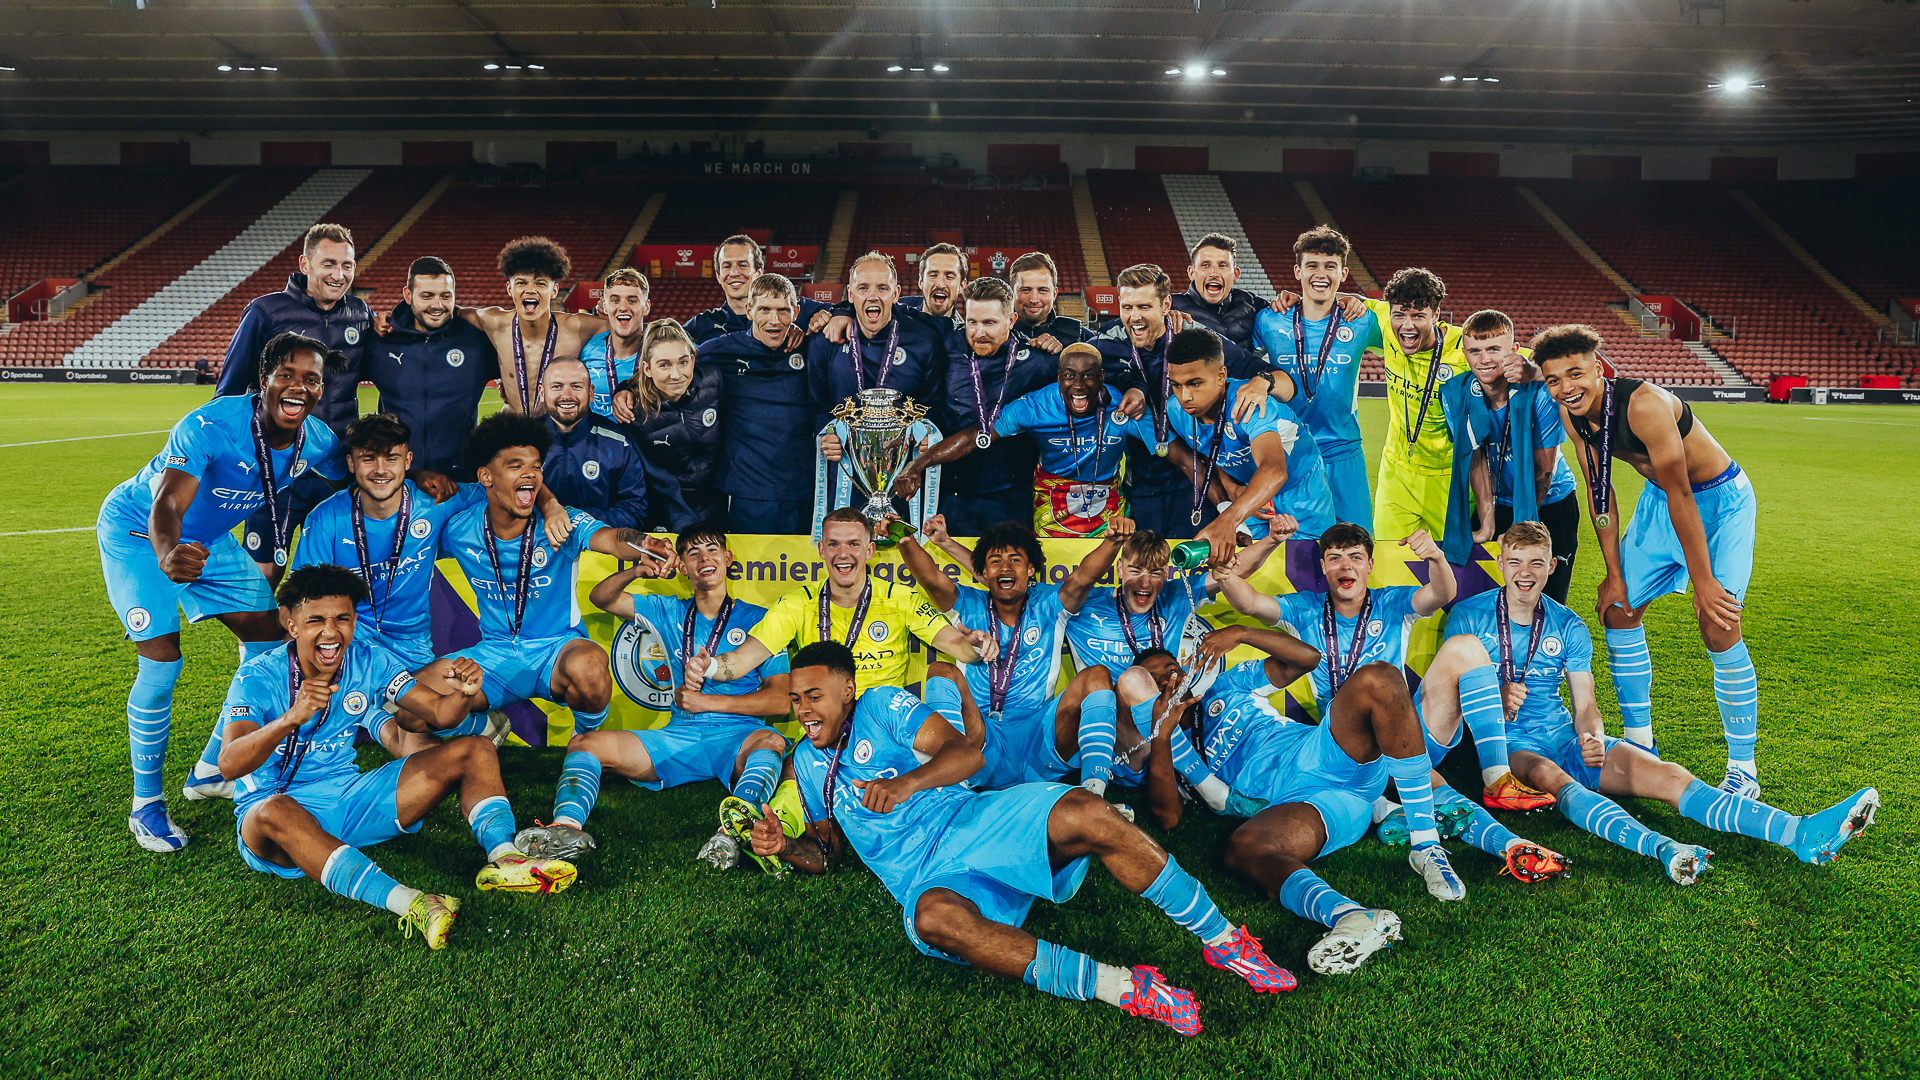 LEAGUE OF THEIR OWN: Our Under-18s retained the Premier League national title back in May with a 2-1 win at Southampton